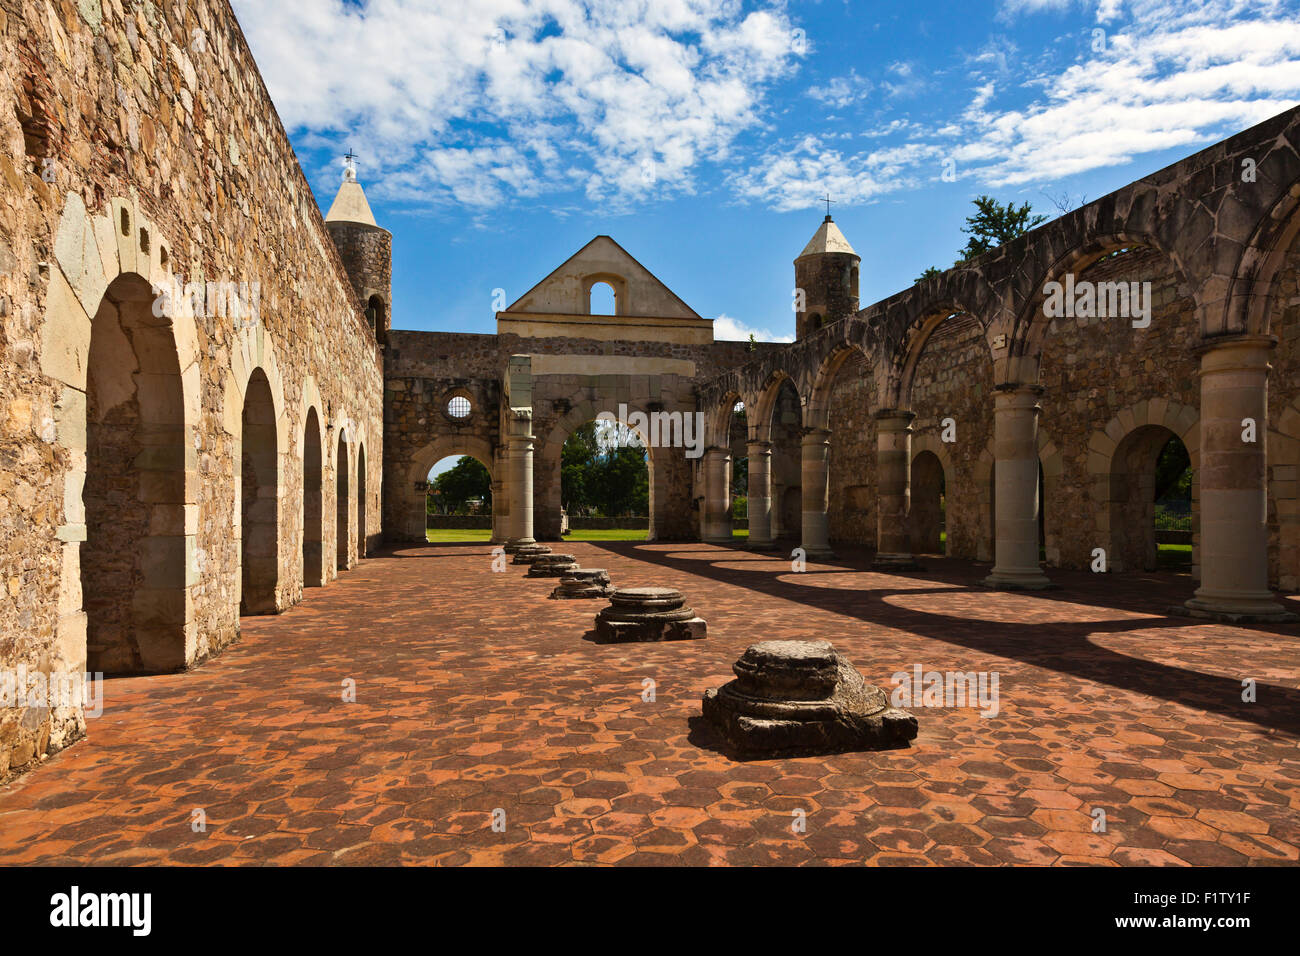 Stone ARCHWAYS in the 16th century CONVENT of CUILAPAN the former Monastery of Santiago Apostol - CUILAPAN DE GUERRERO, MEXICO Stock Photo